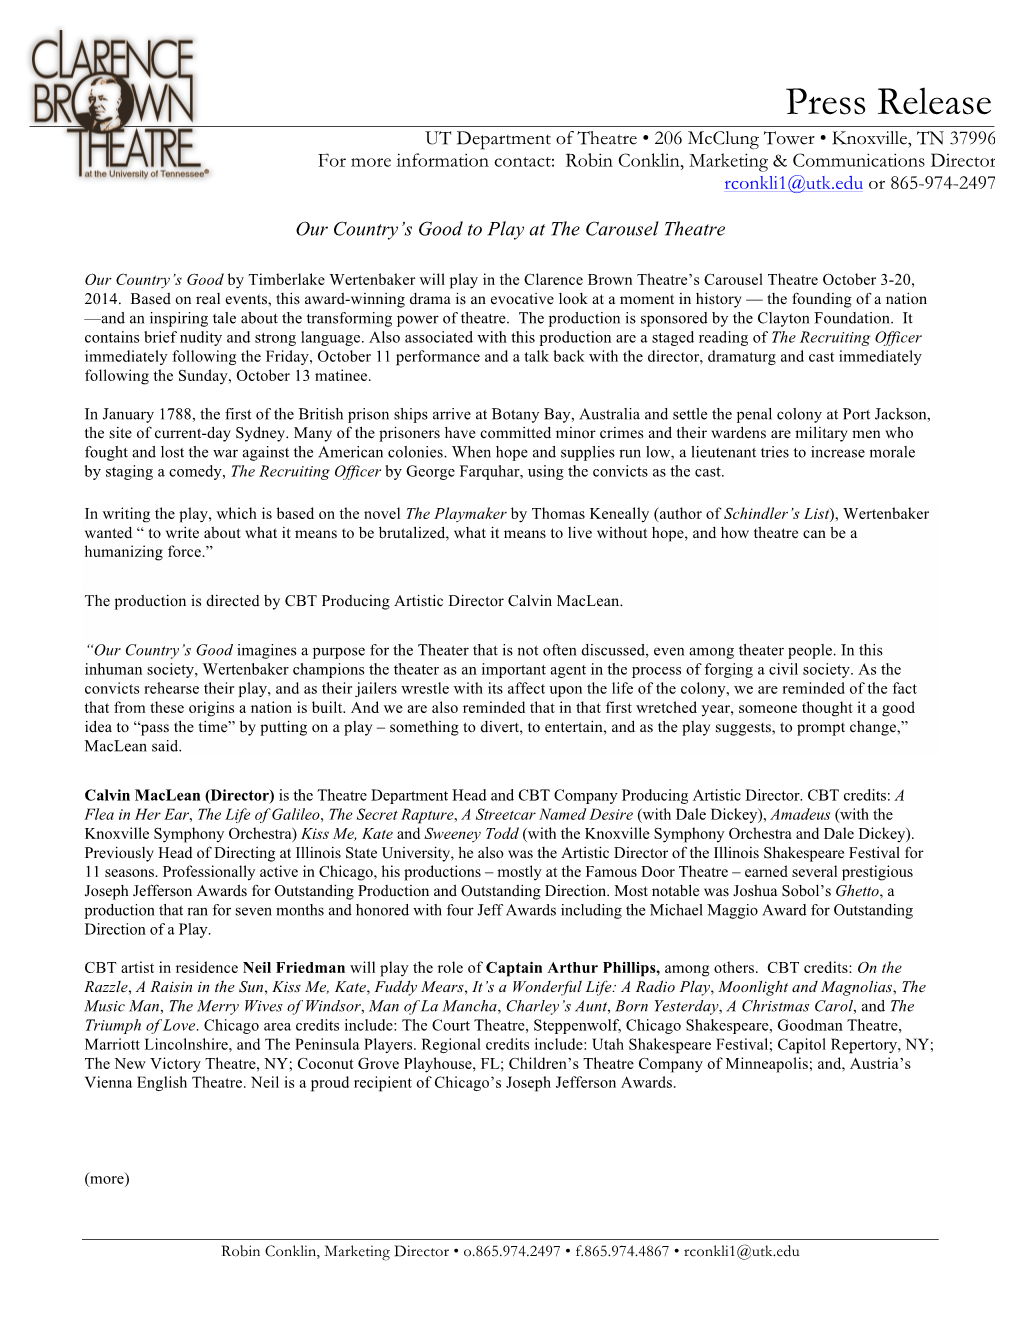 “Our Country's Good” Press Release